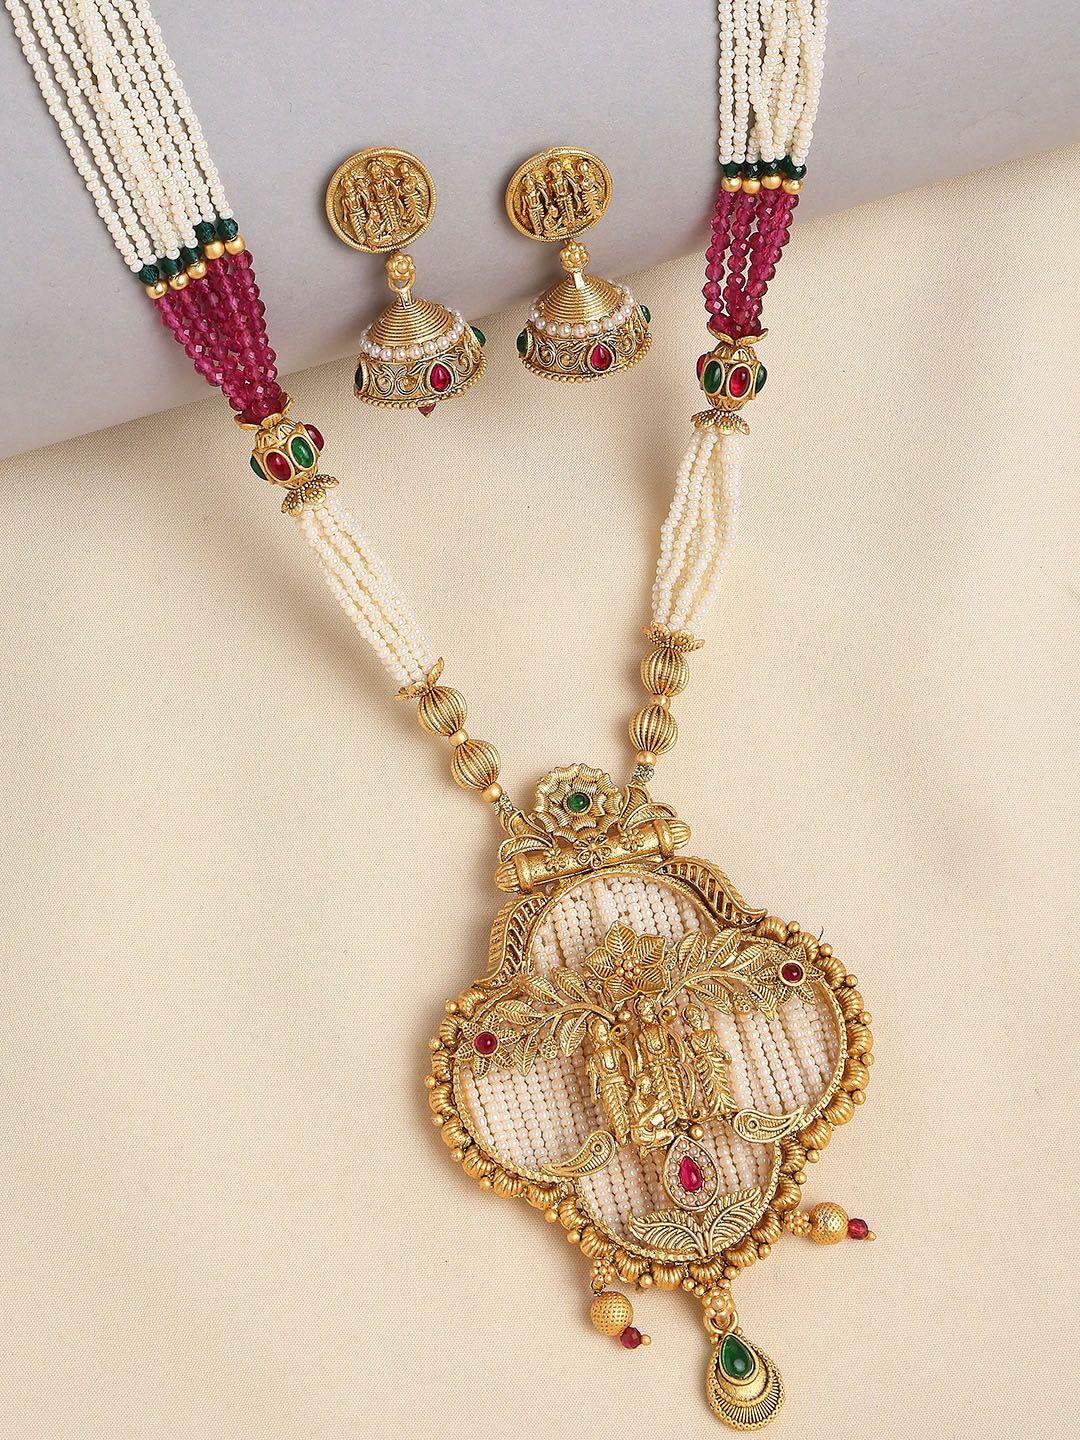 oomph gold-plated stone-studded & beaded lord ram, sita, laxman necklace jewellery set